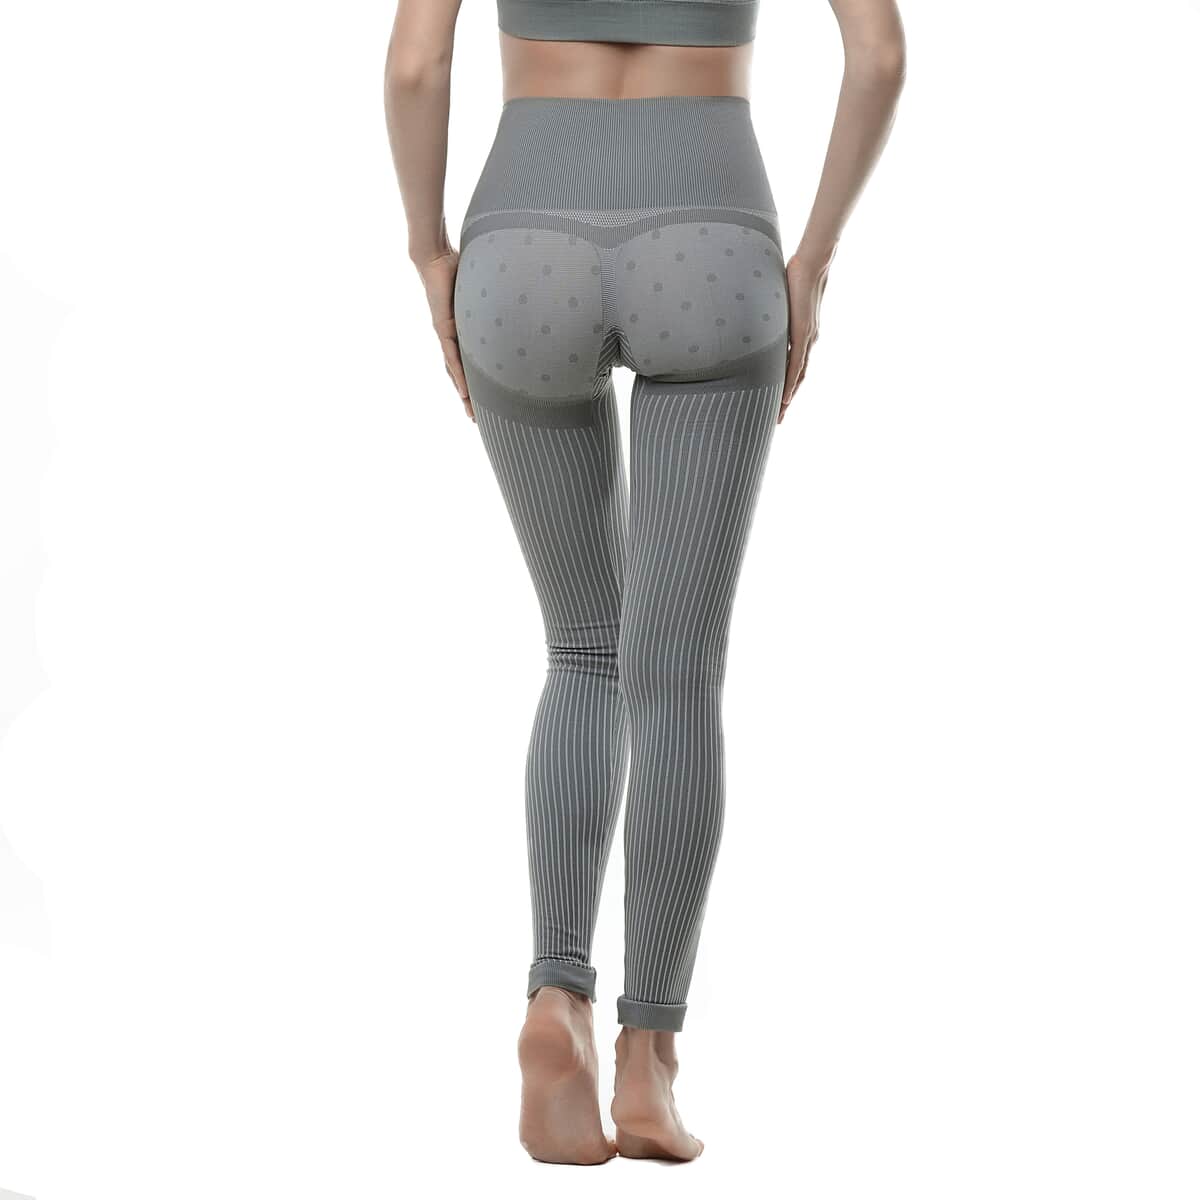 SANKOM Patent Gray Posture And Shaper Leggings For Women With Bamboo Fibers - M/L image number 2